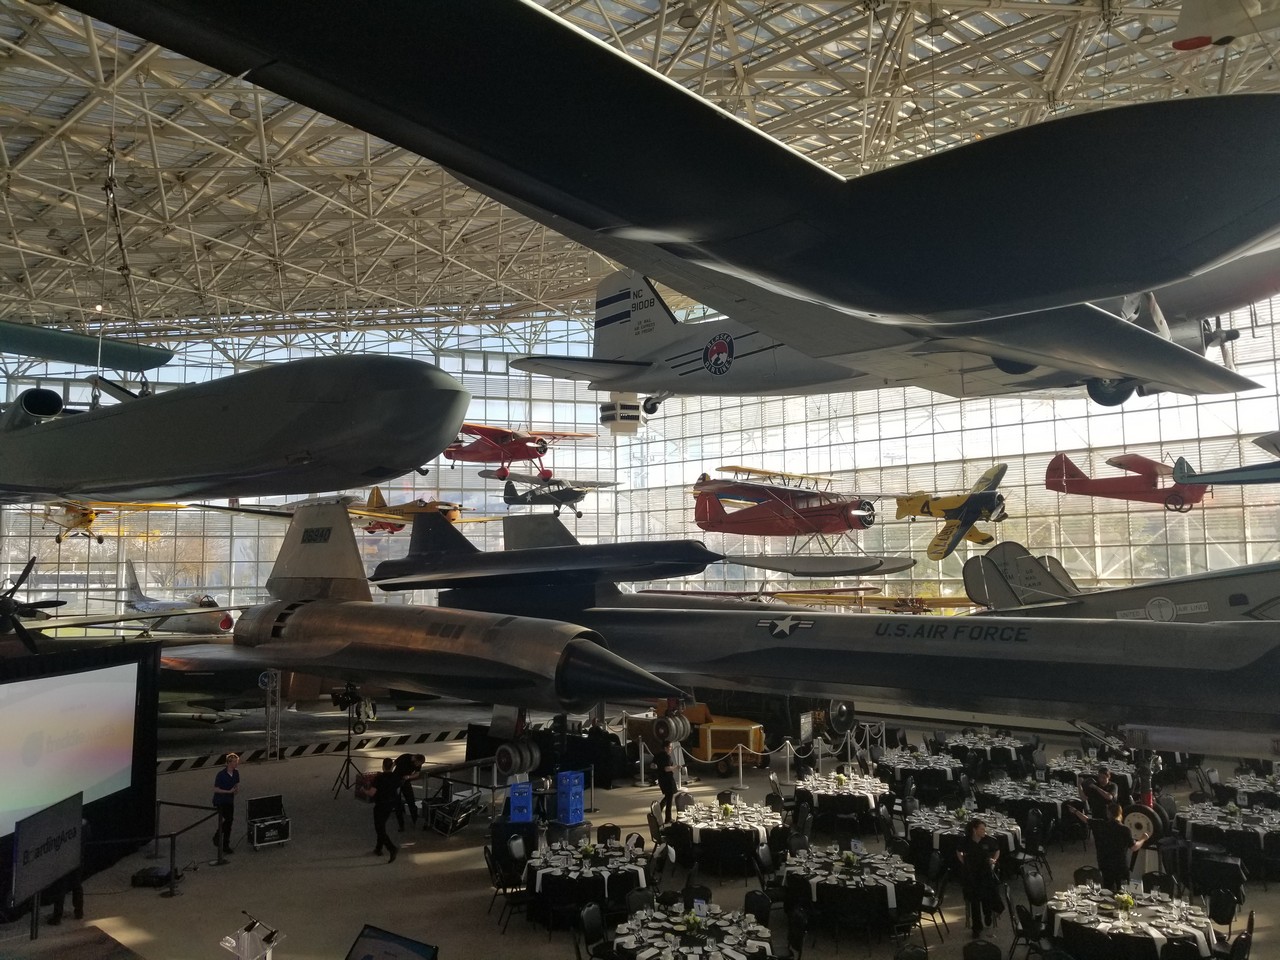 a group of people in a room with airplanes and tables